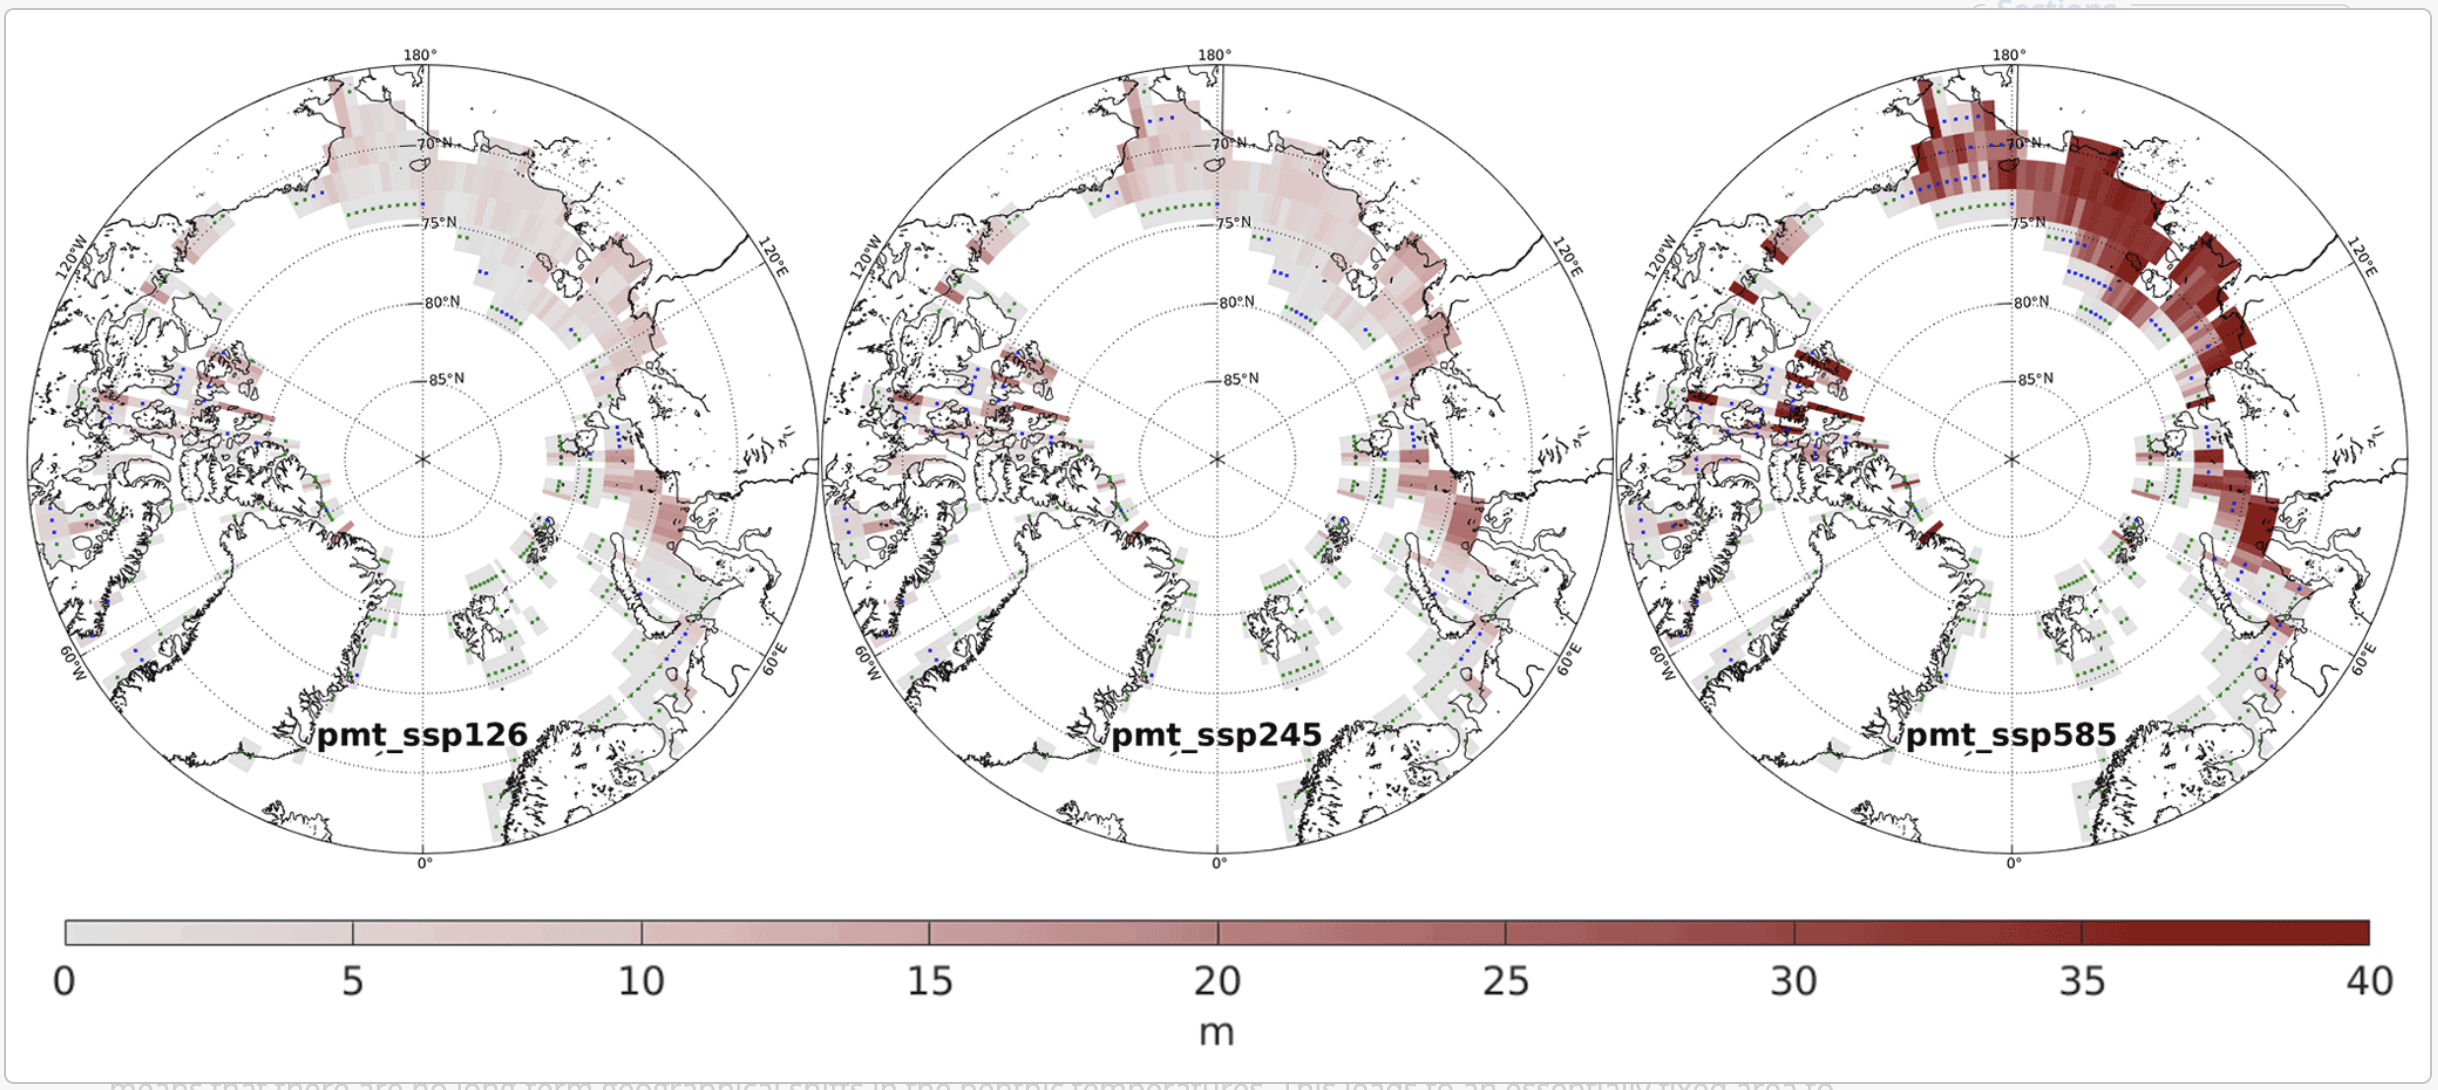 Strong increase in thawing of subsea permafrost in the 22nd century caused by anthropogenic climate change